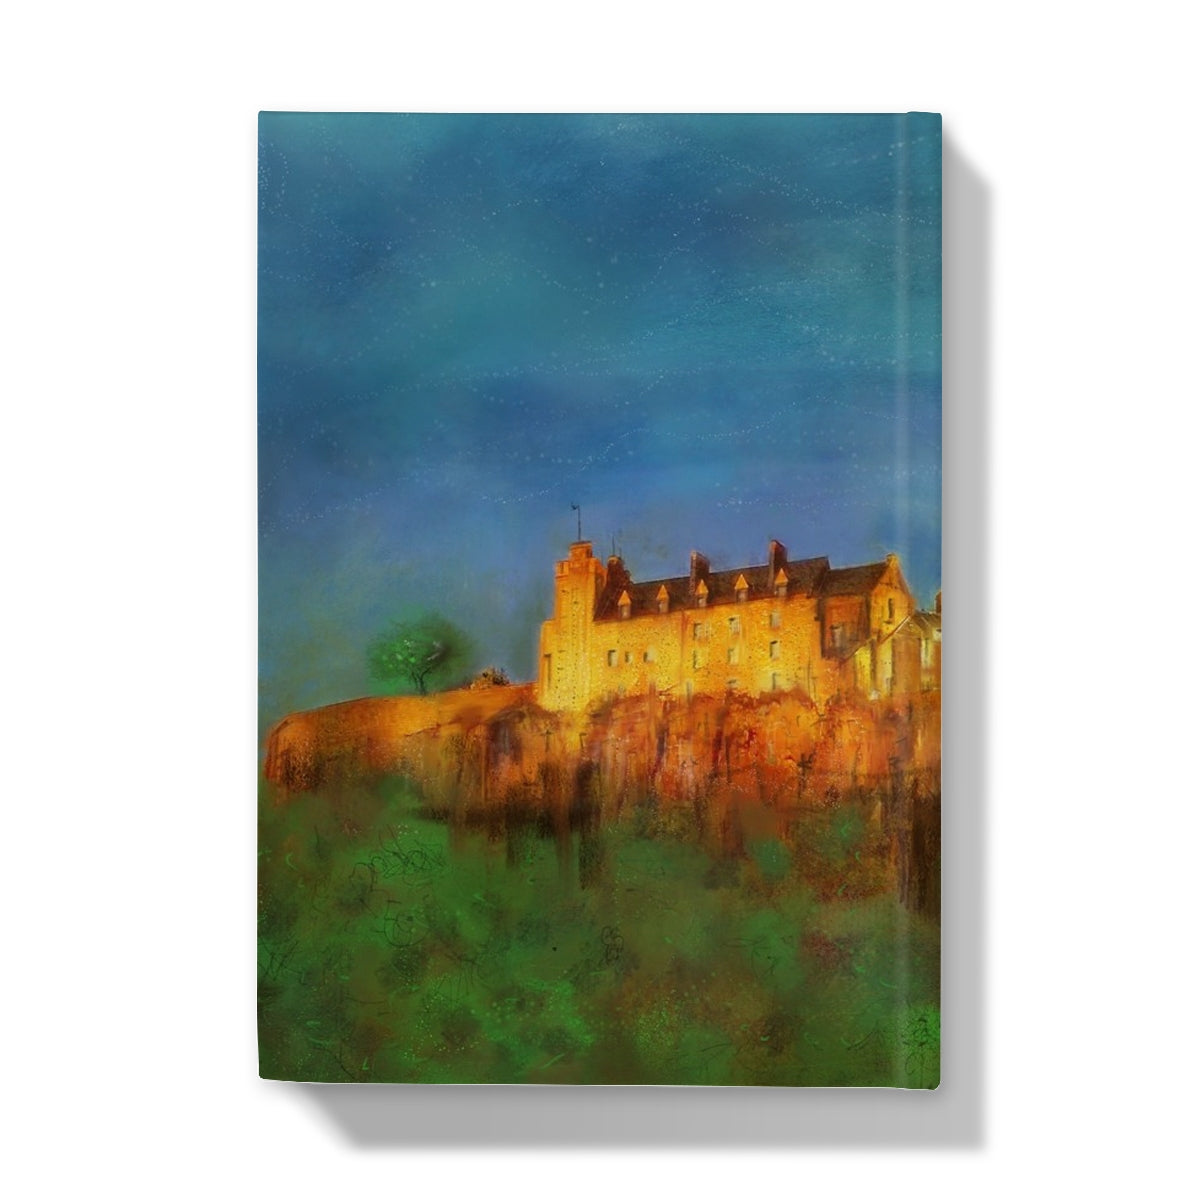 Stirling Castle Art Gifts Hardback Journal-Journals & Notebooks-Historic & Iconic Scotland Art Gallery-Paintings, Prints, Homeware, Art Gifts From Scotland By Scottish Artist Kevin Hunter